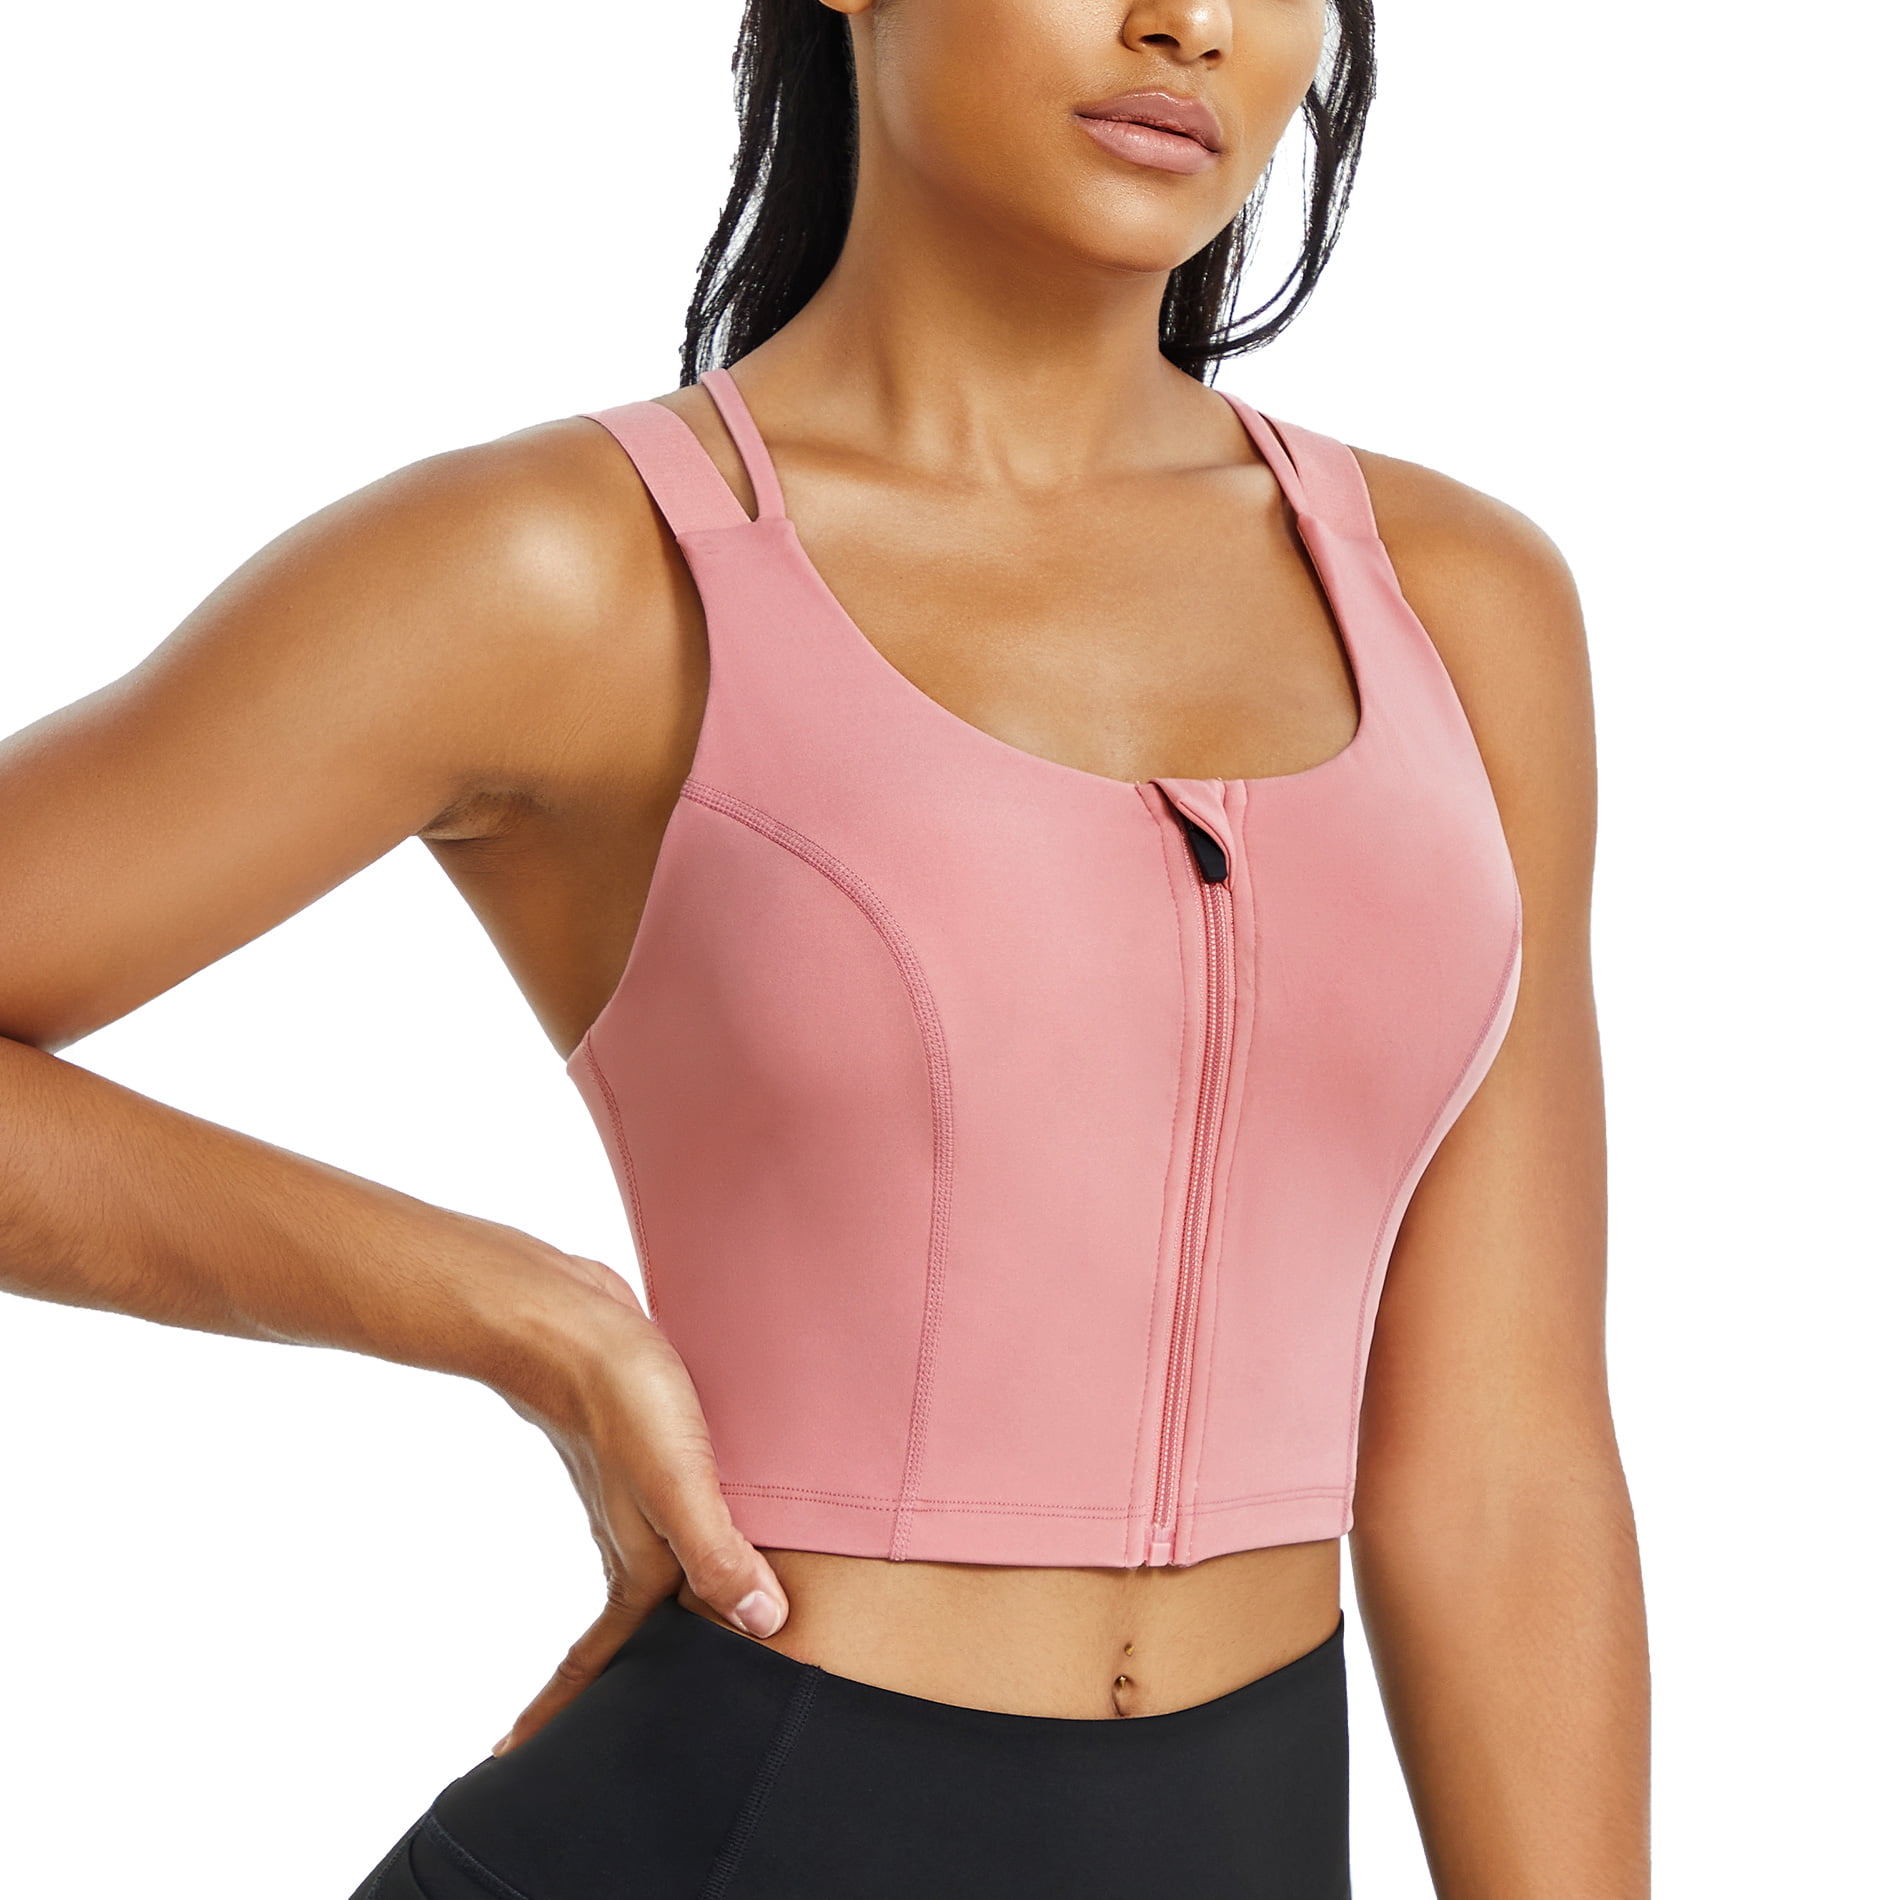 Gotoly Longline Sports Bra Criss Cross Top for Womens Strappy Wireless Bra  Zip Front Workout Crop top Padded Tank top(Pink XX-Large) 